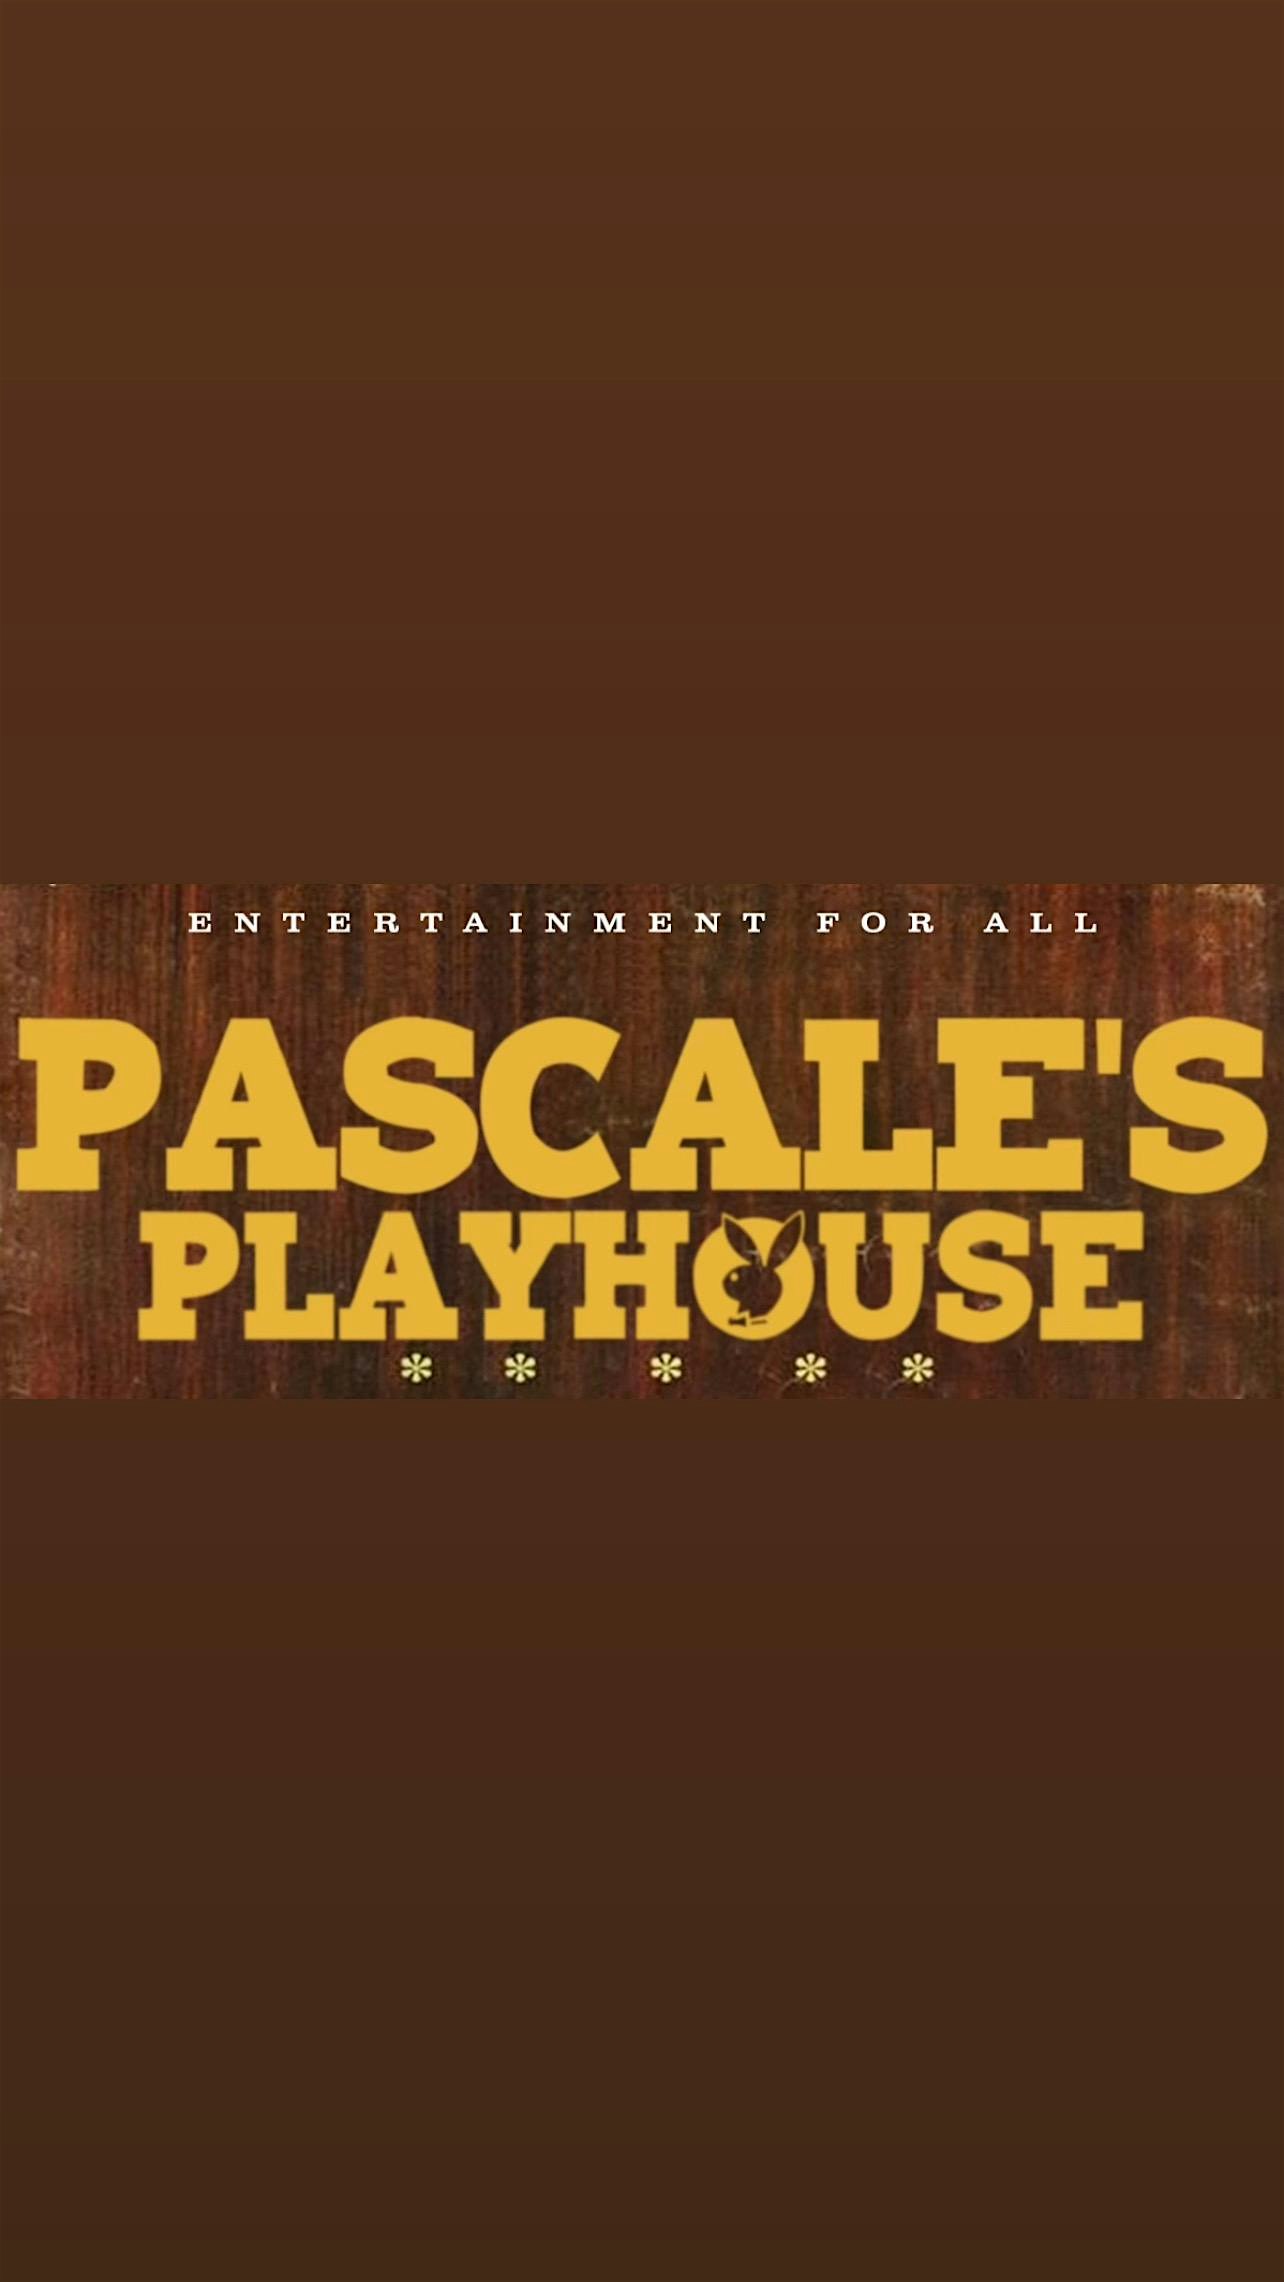 Pascale's Playhouse